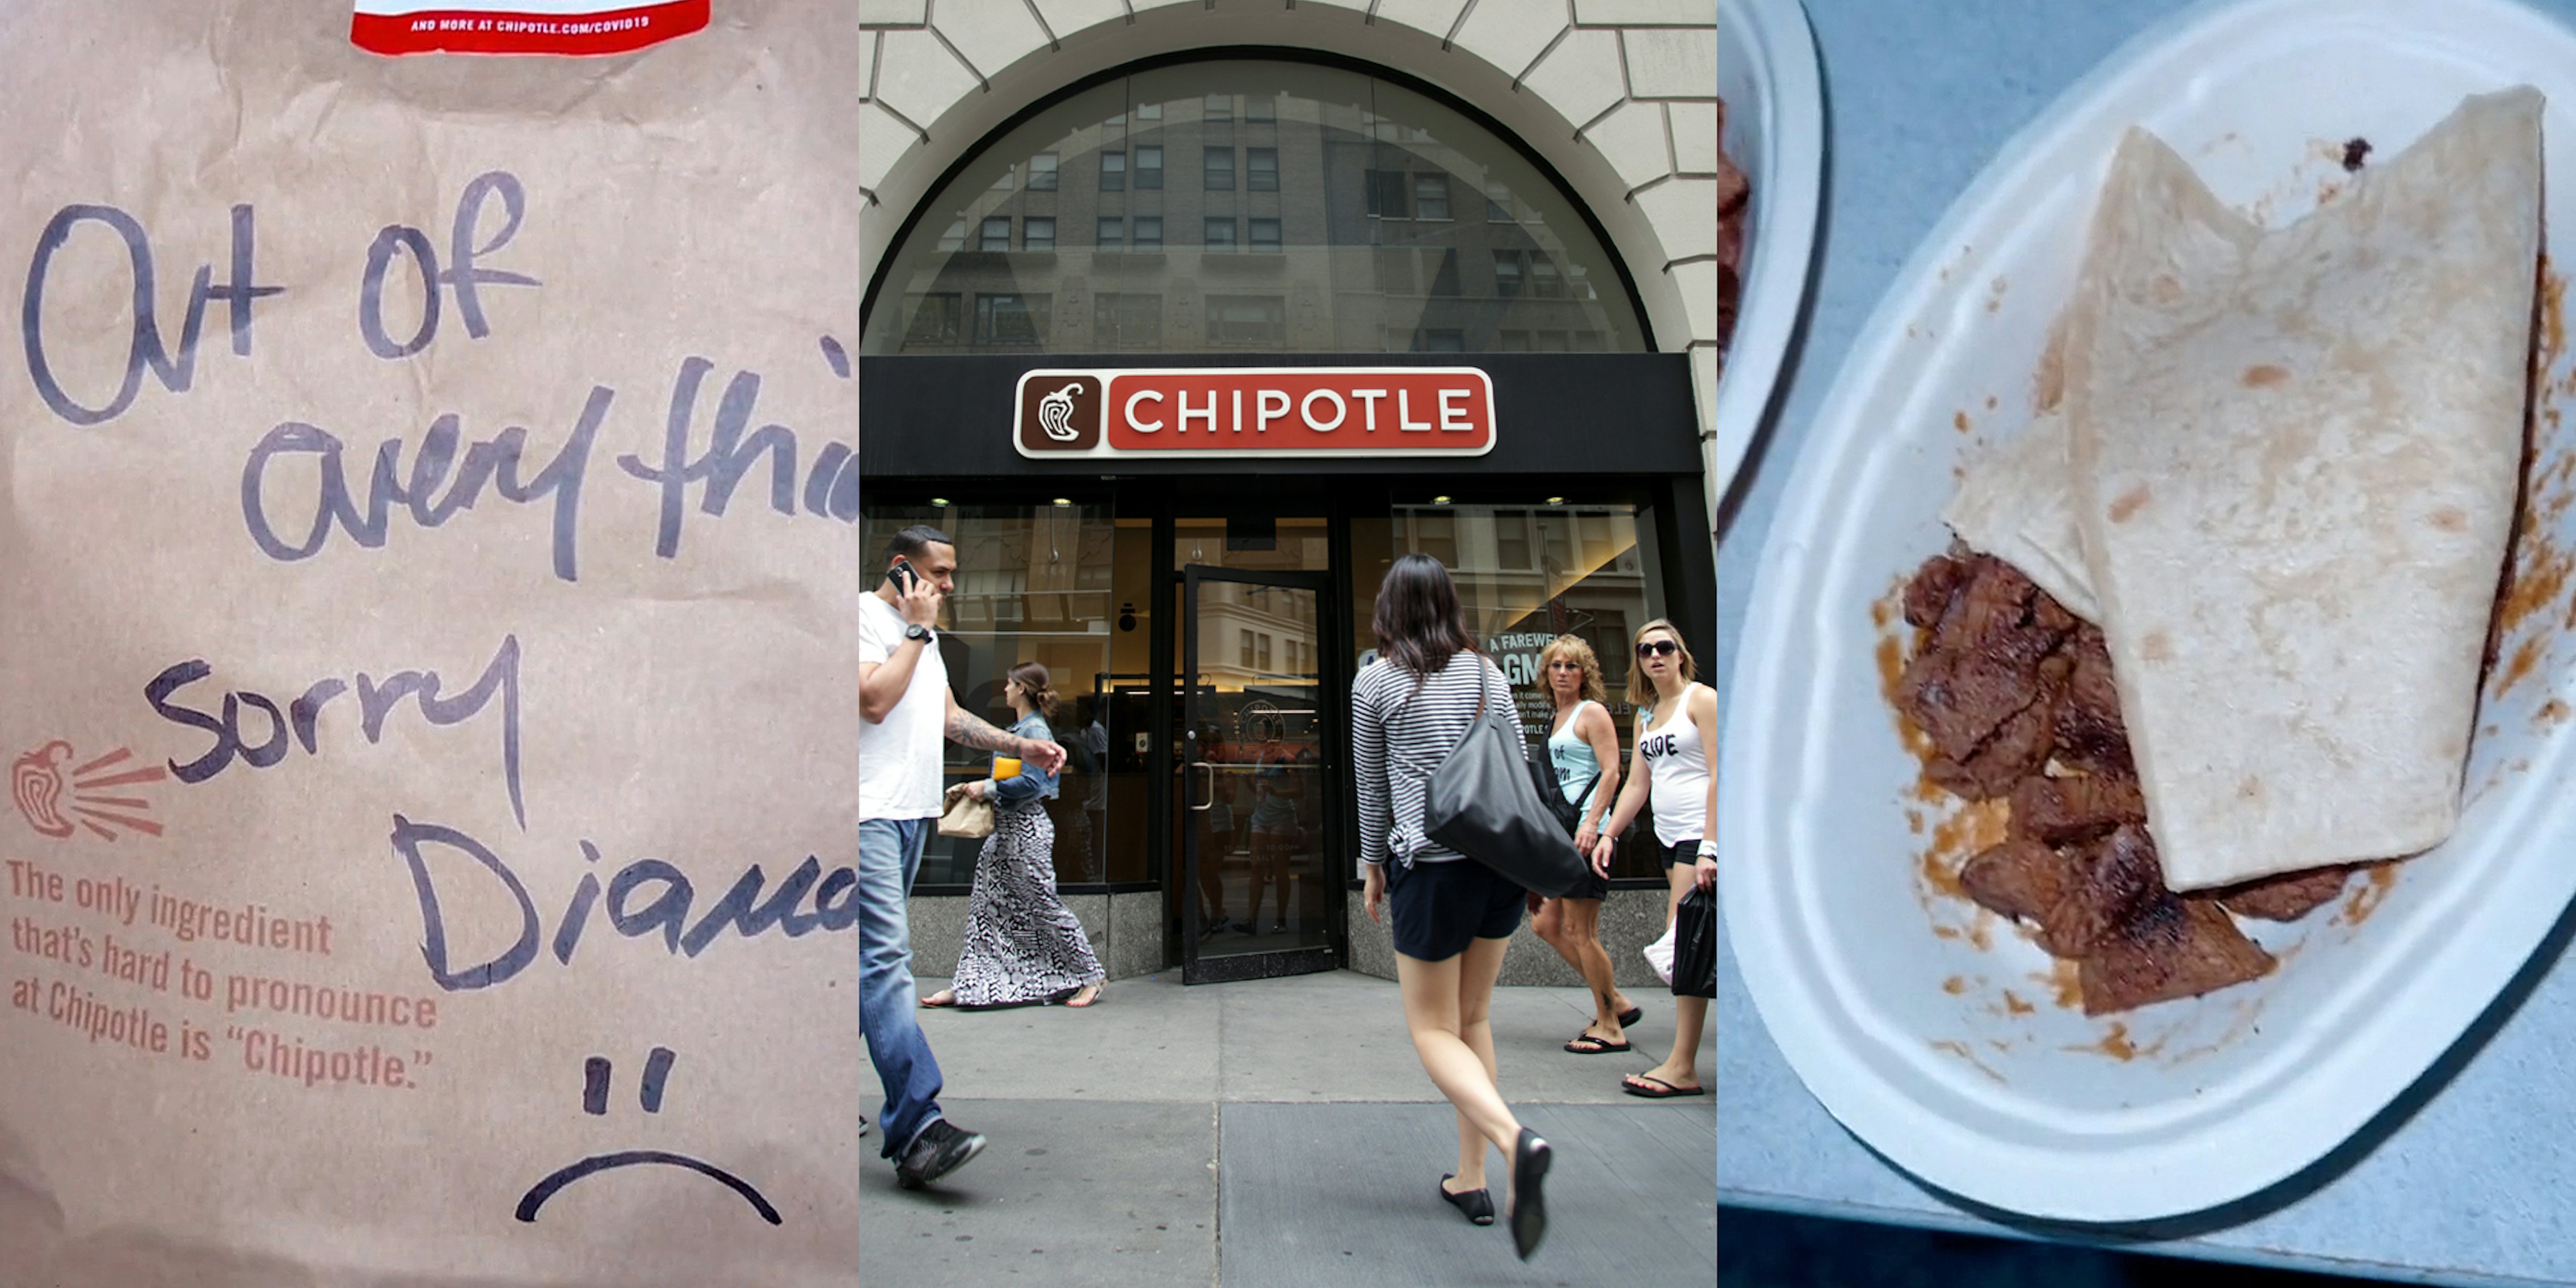 DoorDash delivery of Chipotle food in paper bag caption ' Out of everything sorry' (l) Chipotle sign on building front with people walking by (c) Chipotle food in bowl (r)